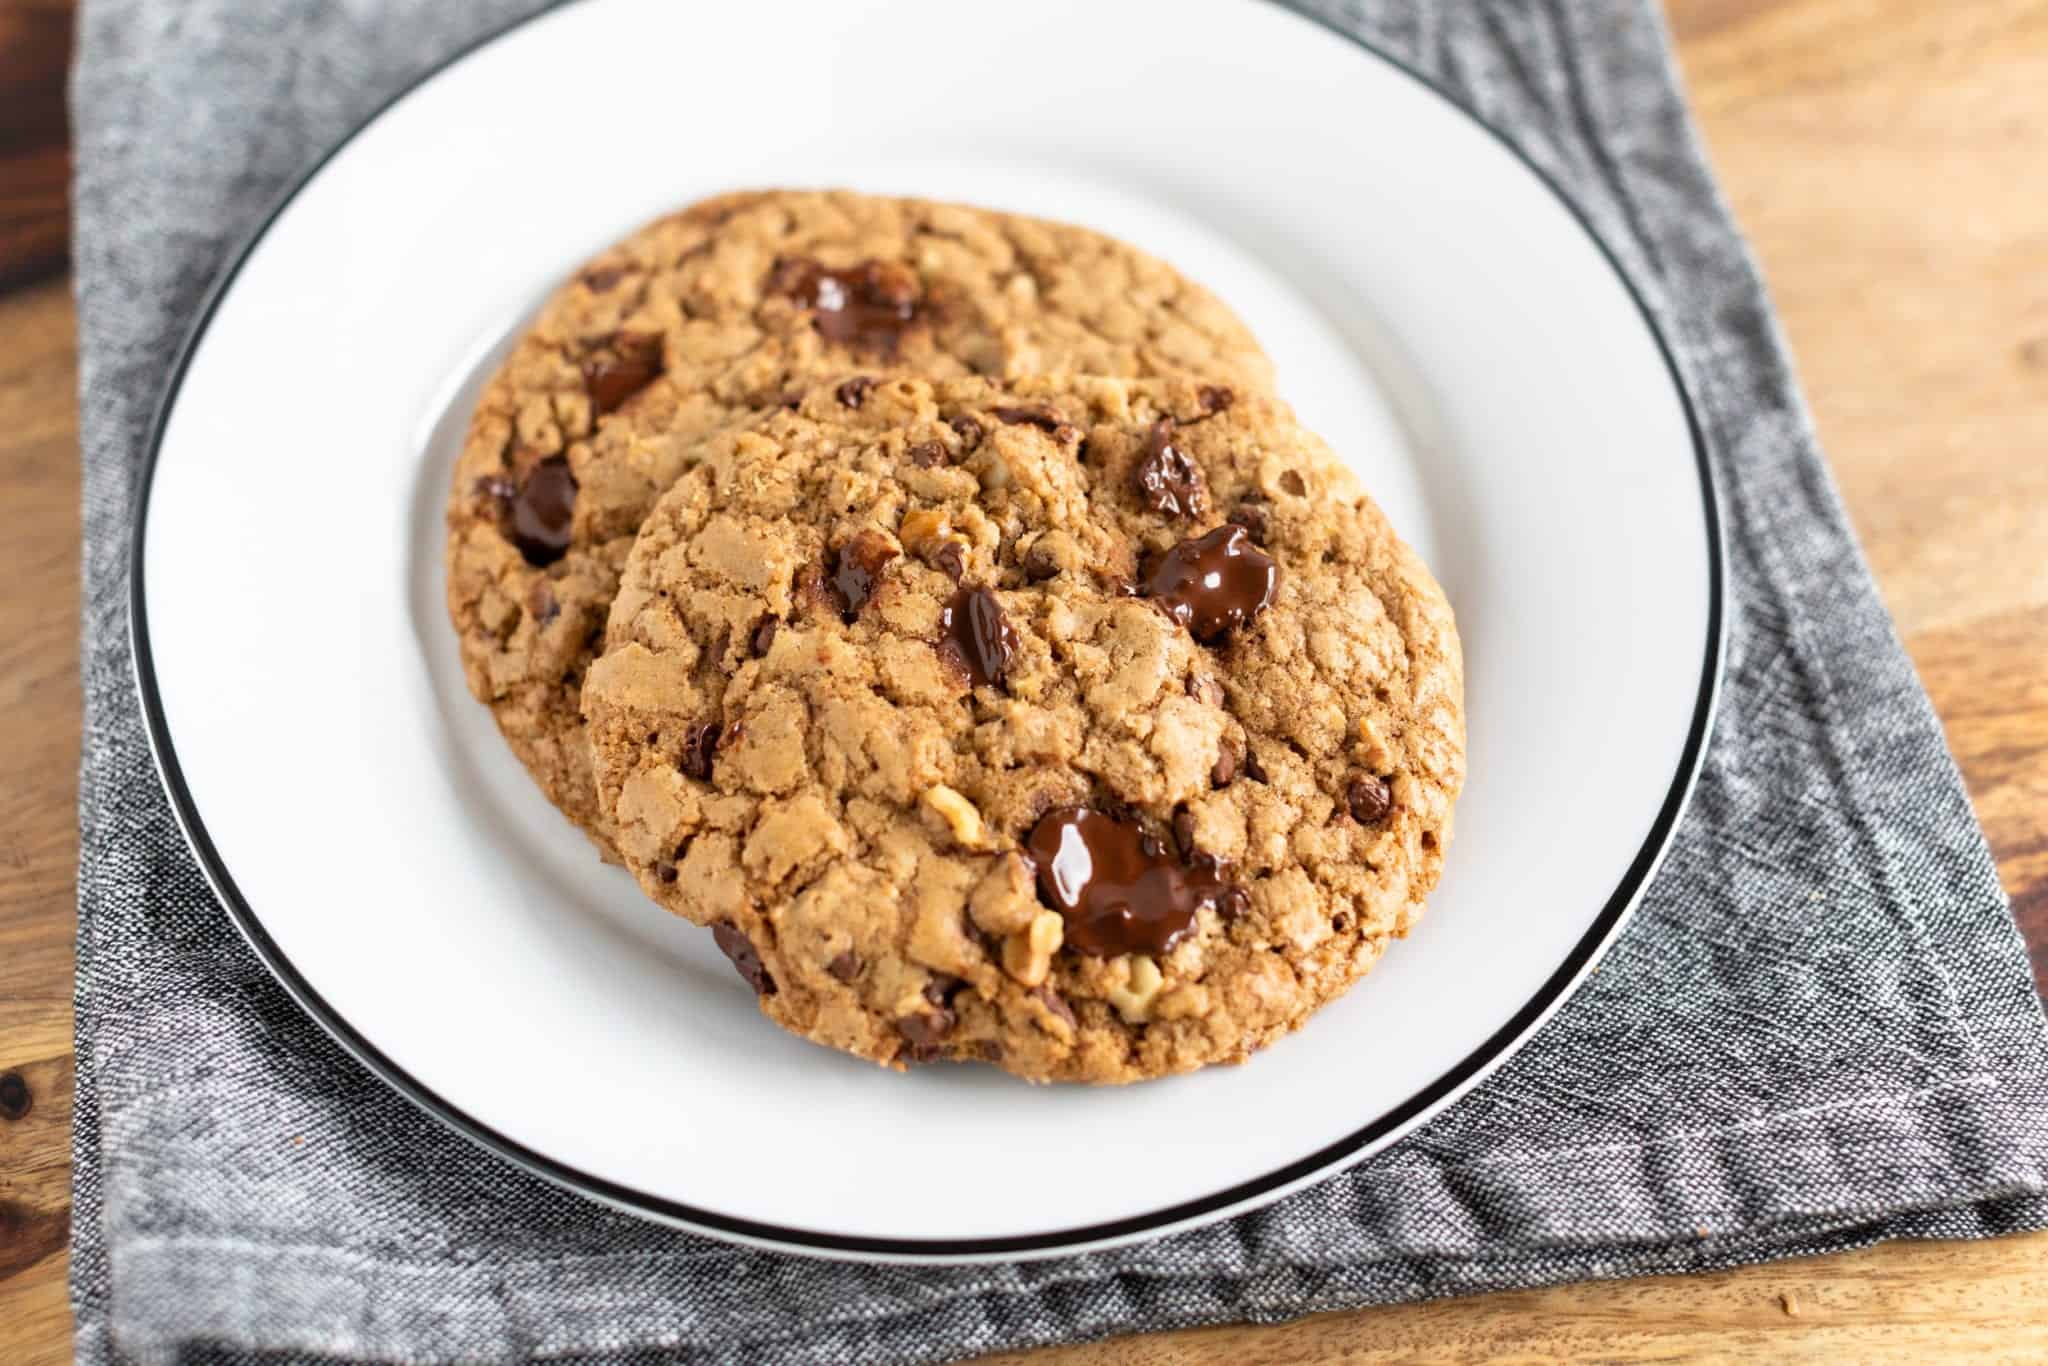 DoubleTree's Signature Chocolate Chip Cookie served on white dish with black rim and denim napkin #cookie #chocolatechipcookie #doubletreesignaturecookie #baking